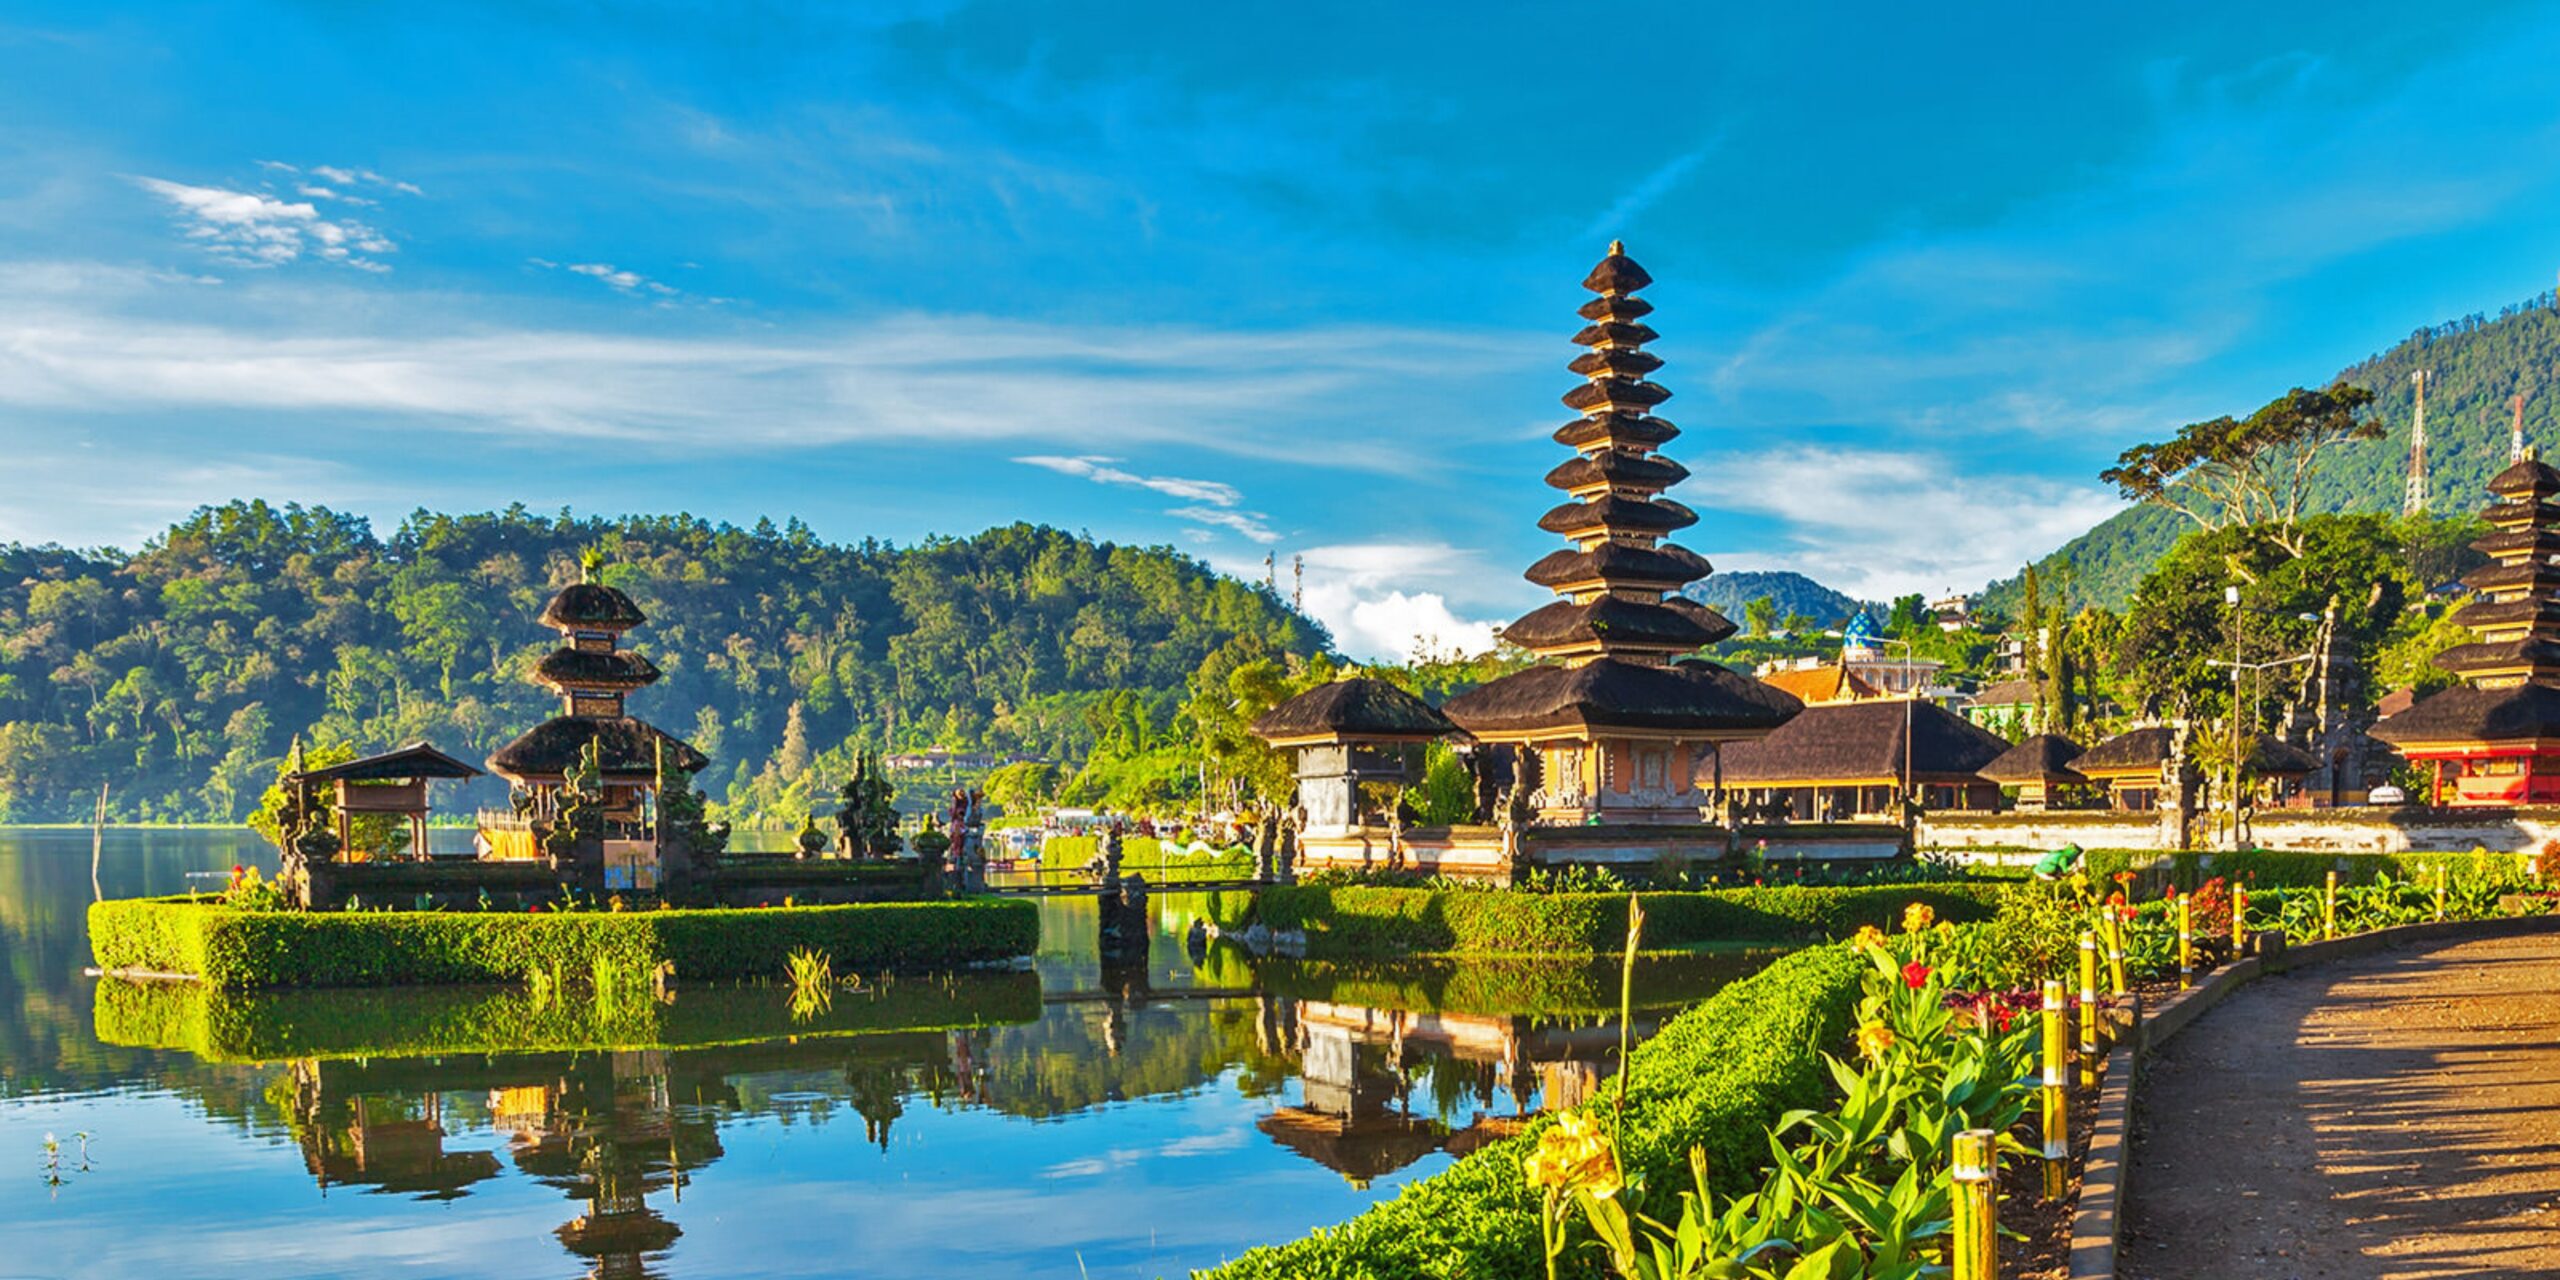 bali tour package